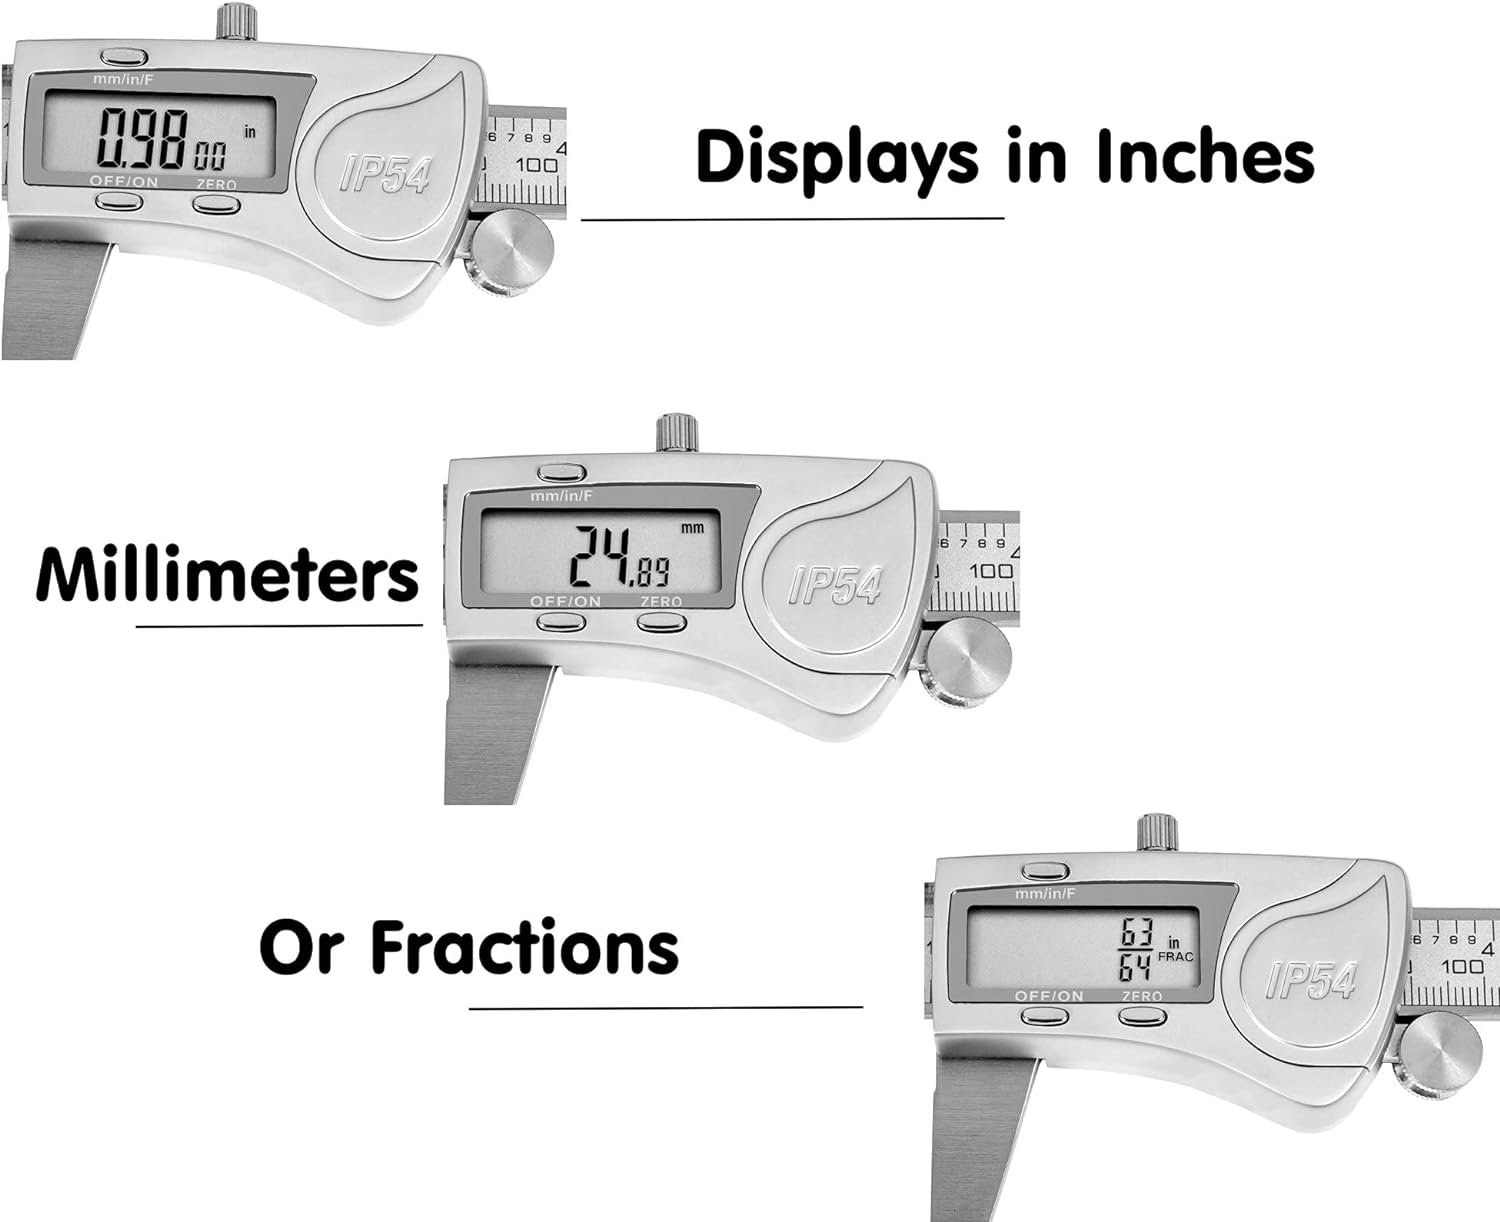 Digital Fractional Caliper Durable and Accurate,150mm Durable Stainless Steel Electronic Measuring Tool with Large Digital Display and Stainless-Steel Body